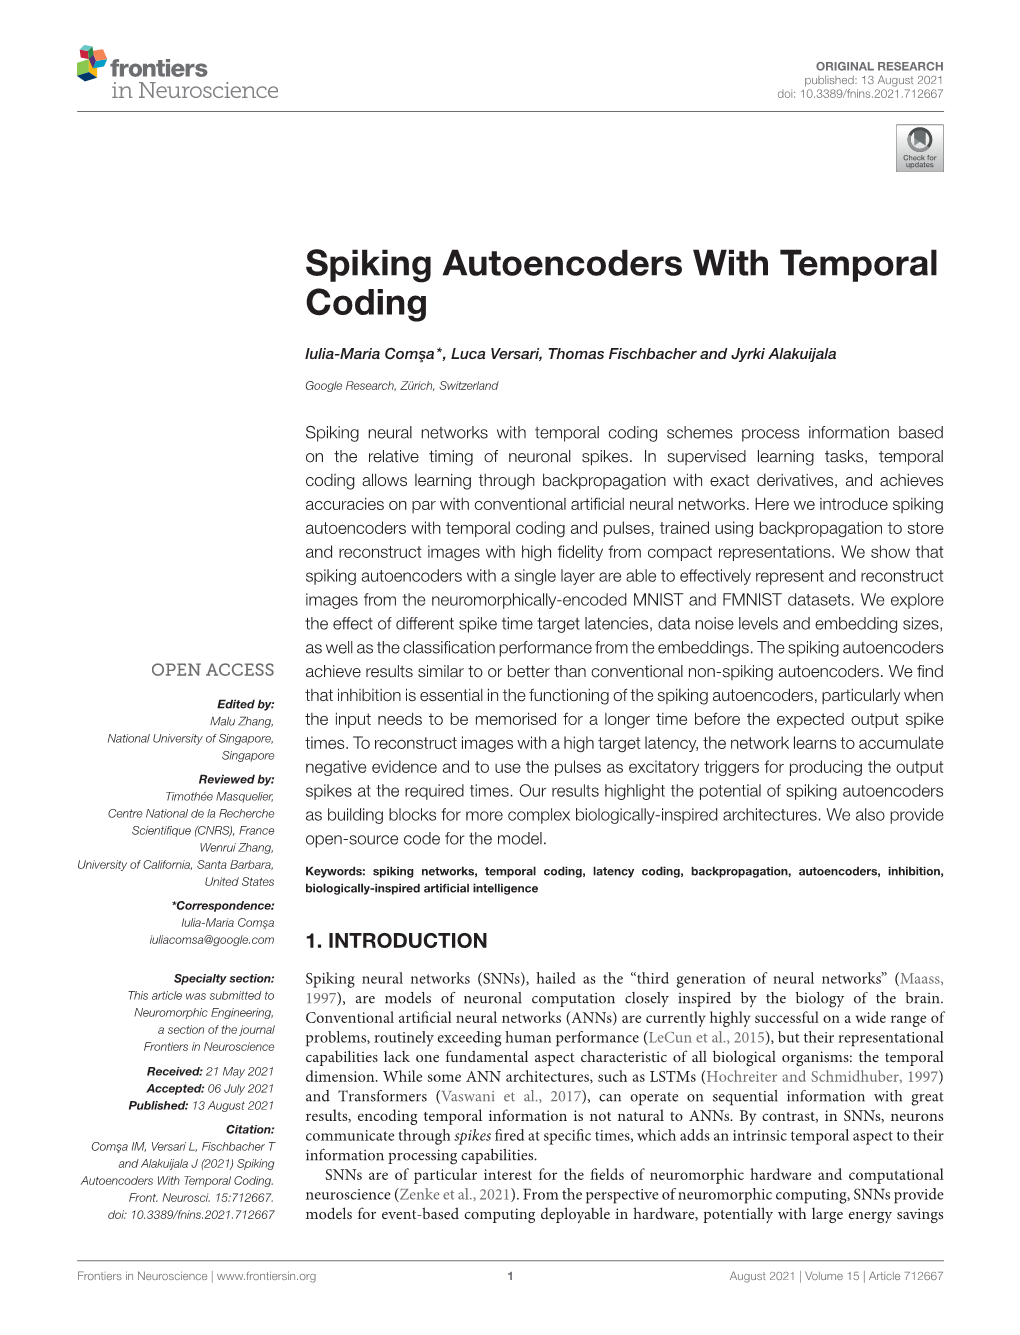 Spiking Autoencoders with Temporal Coding